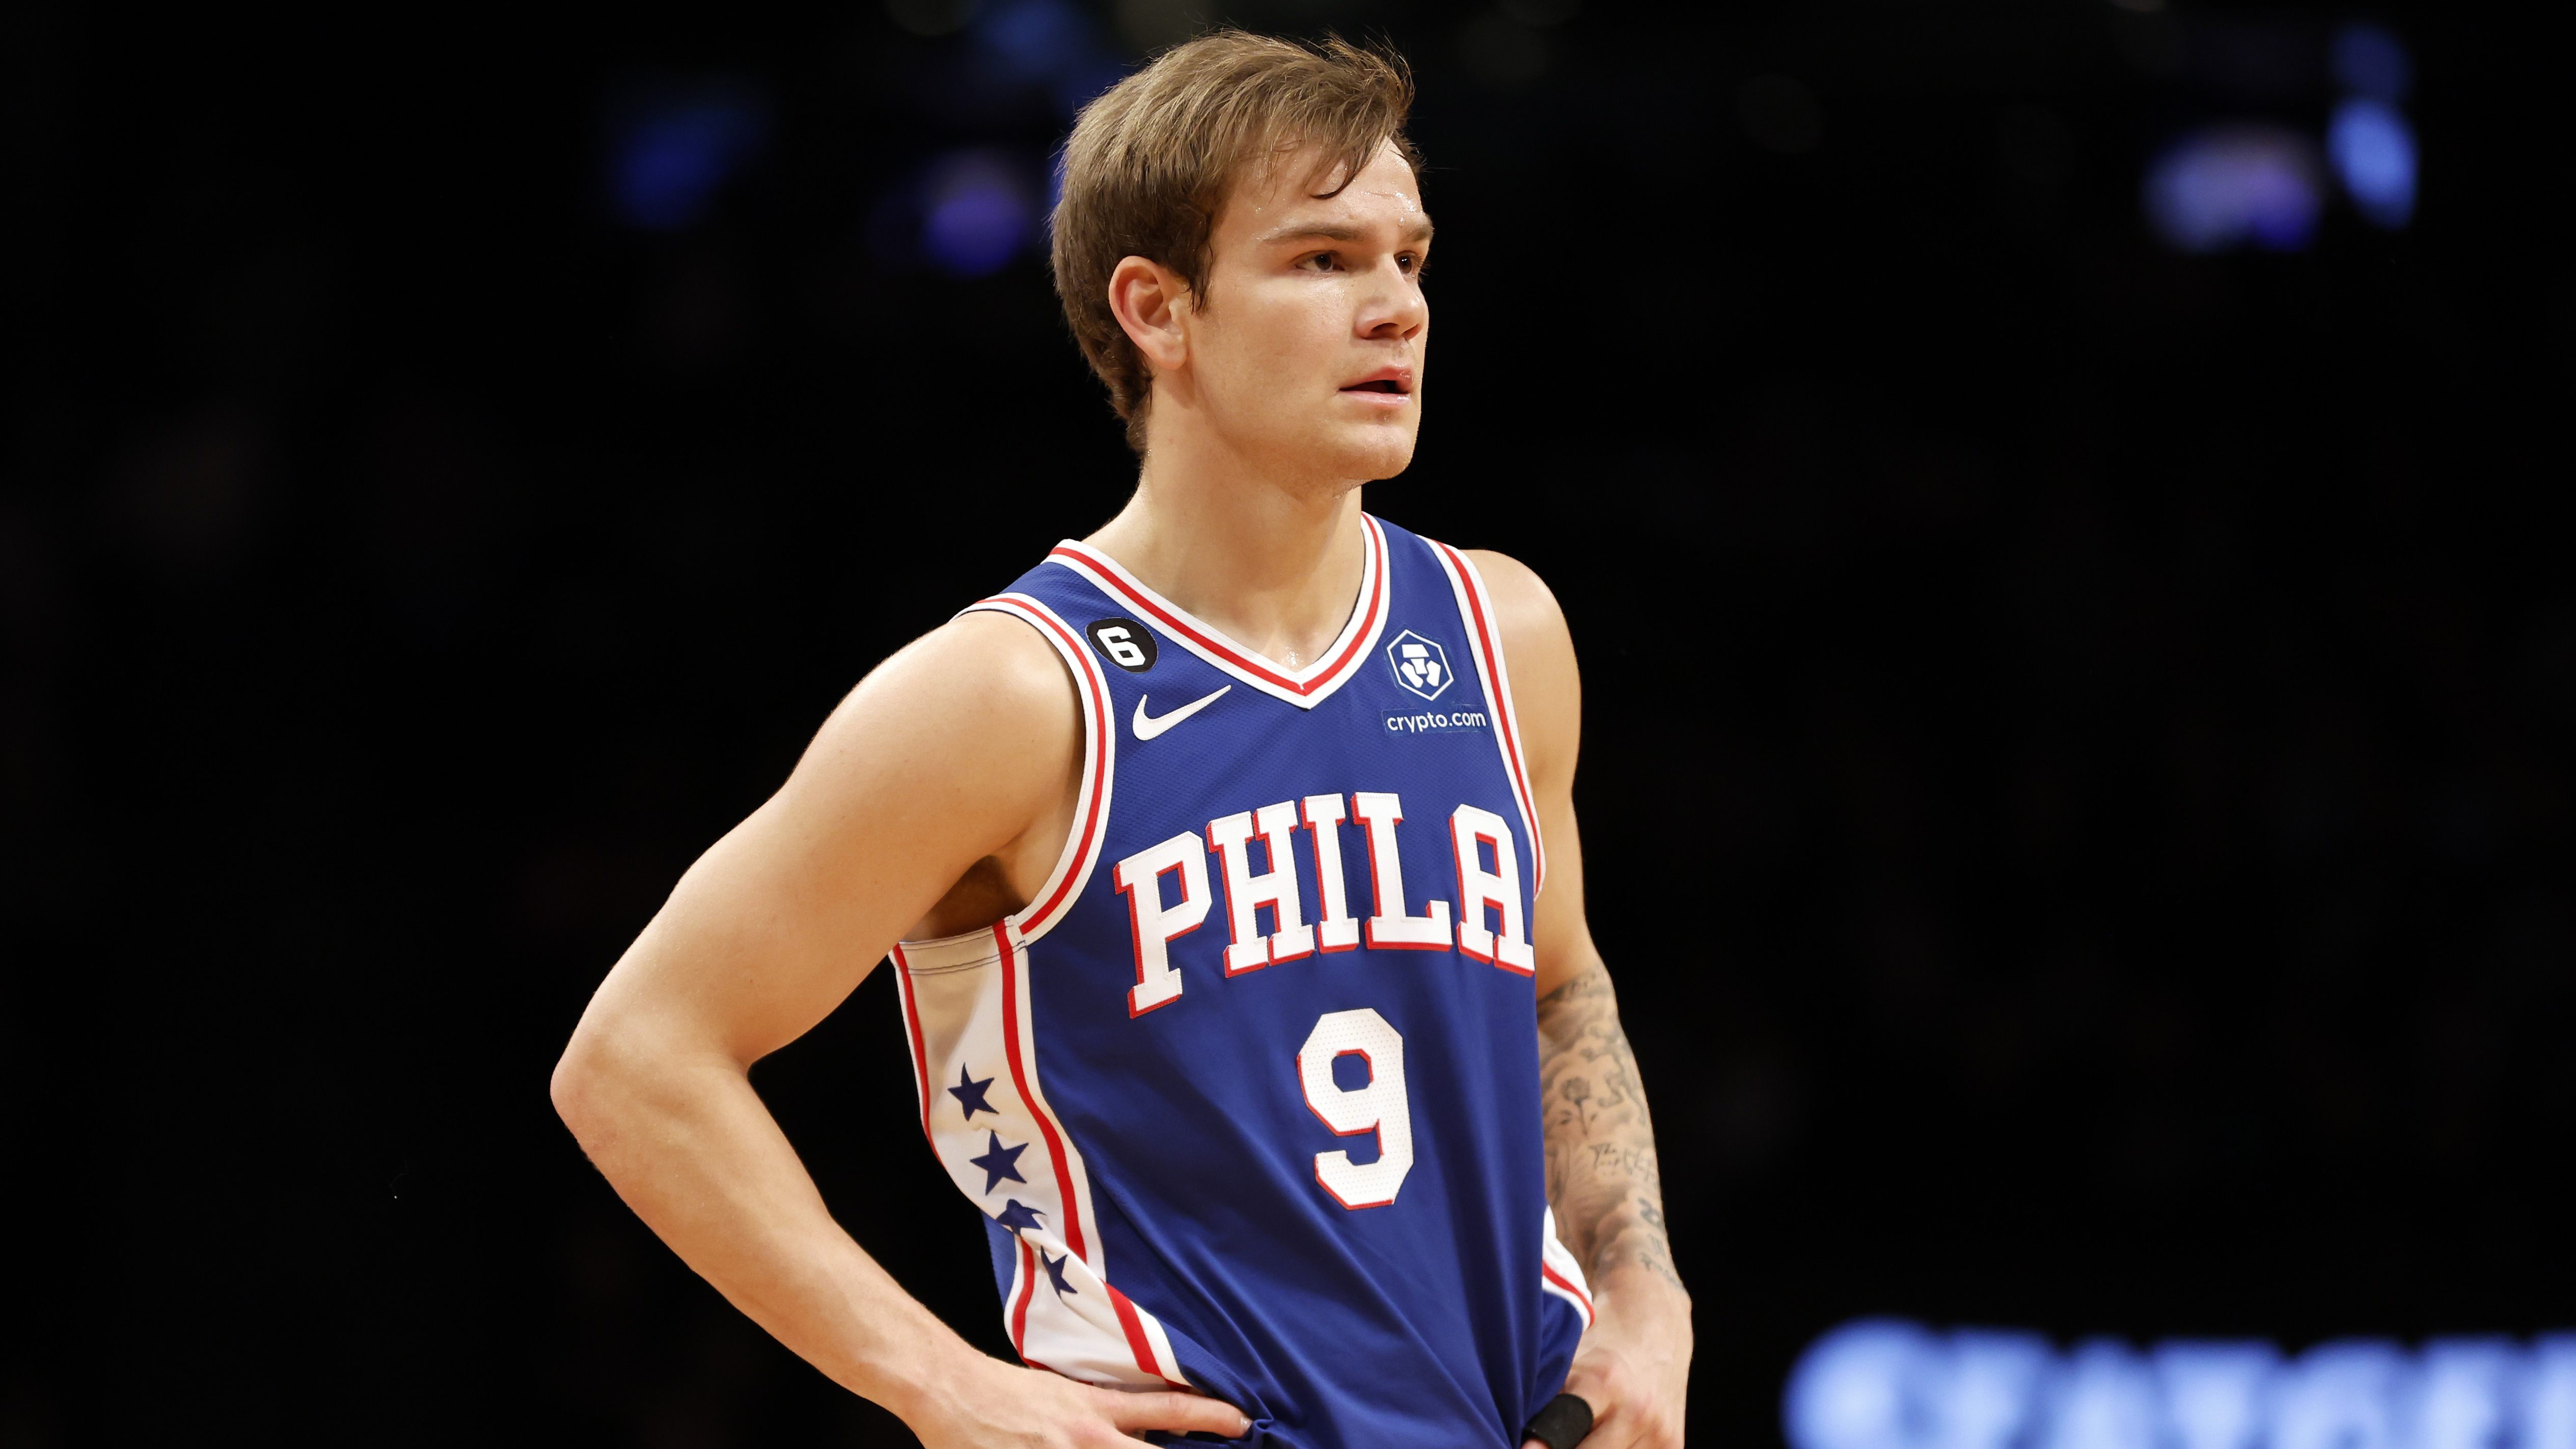 NBA - A career performance from Mac McClung led the Sixers to the W in  Brooklyn! The Sixers and Nets will face off again in Round 1 of the  #NBAPlayoffs presented by